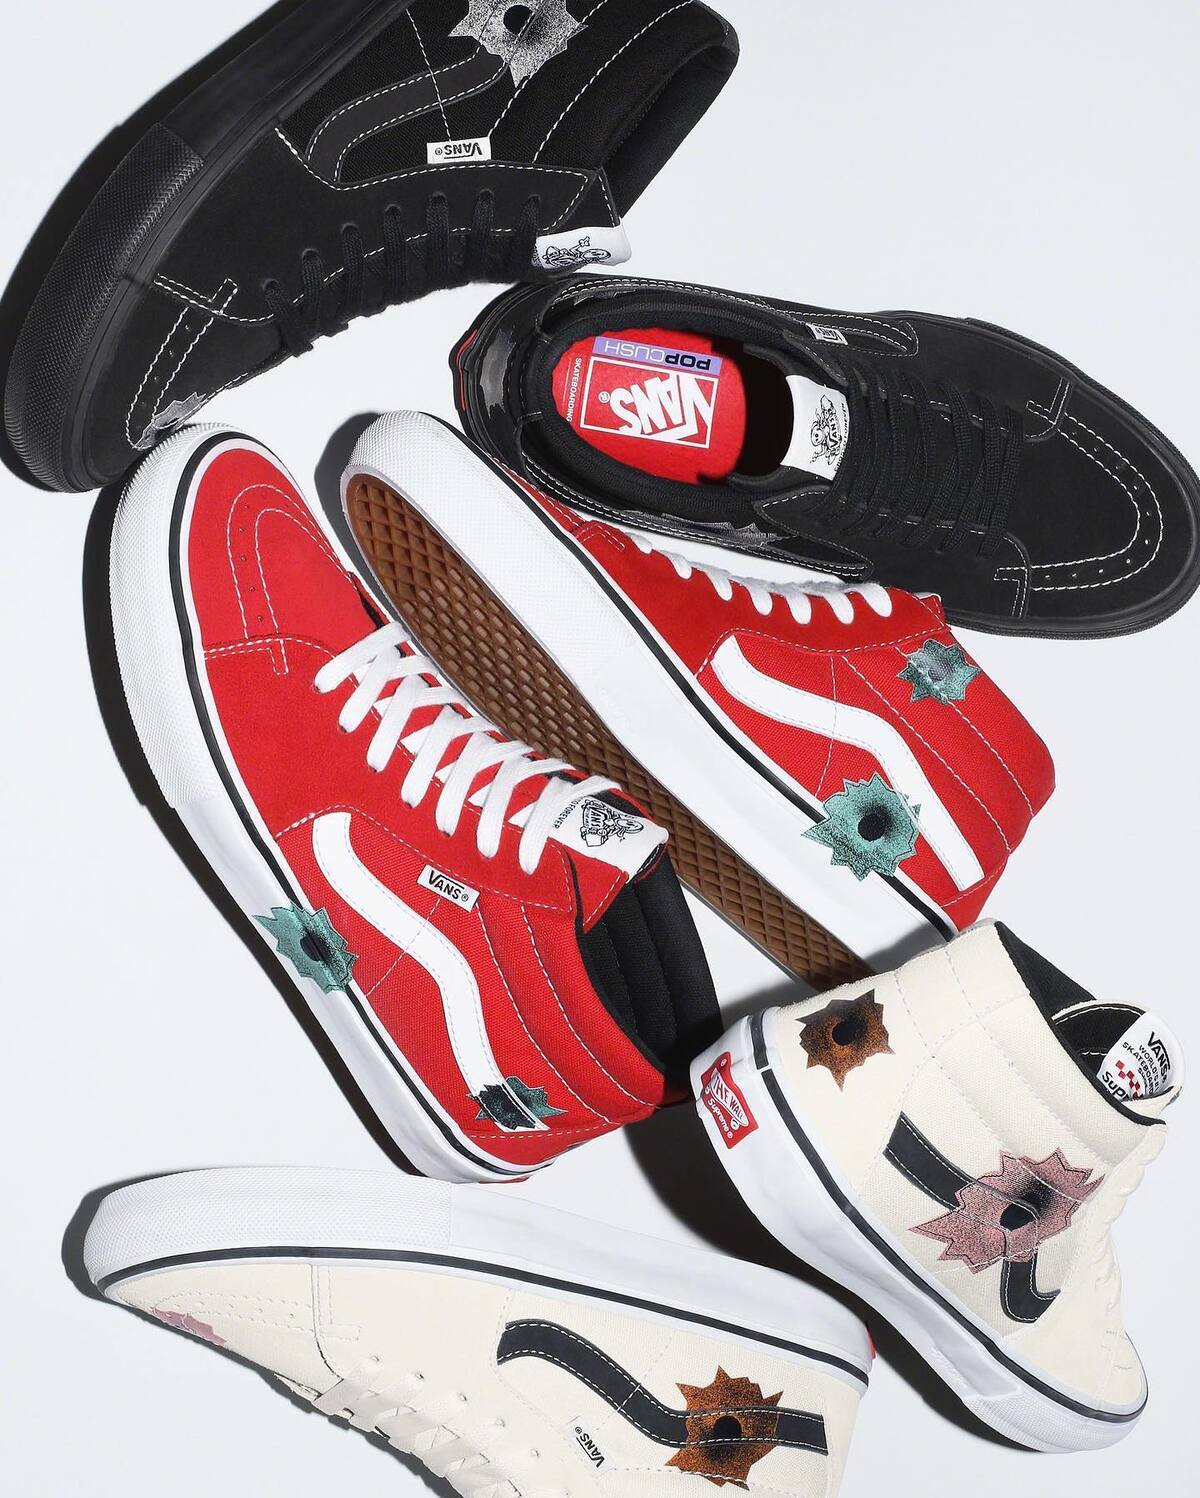 Supreme/Vans/Nate Lowman Skate Grosso Mid in hand look. This